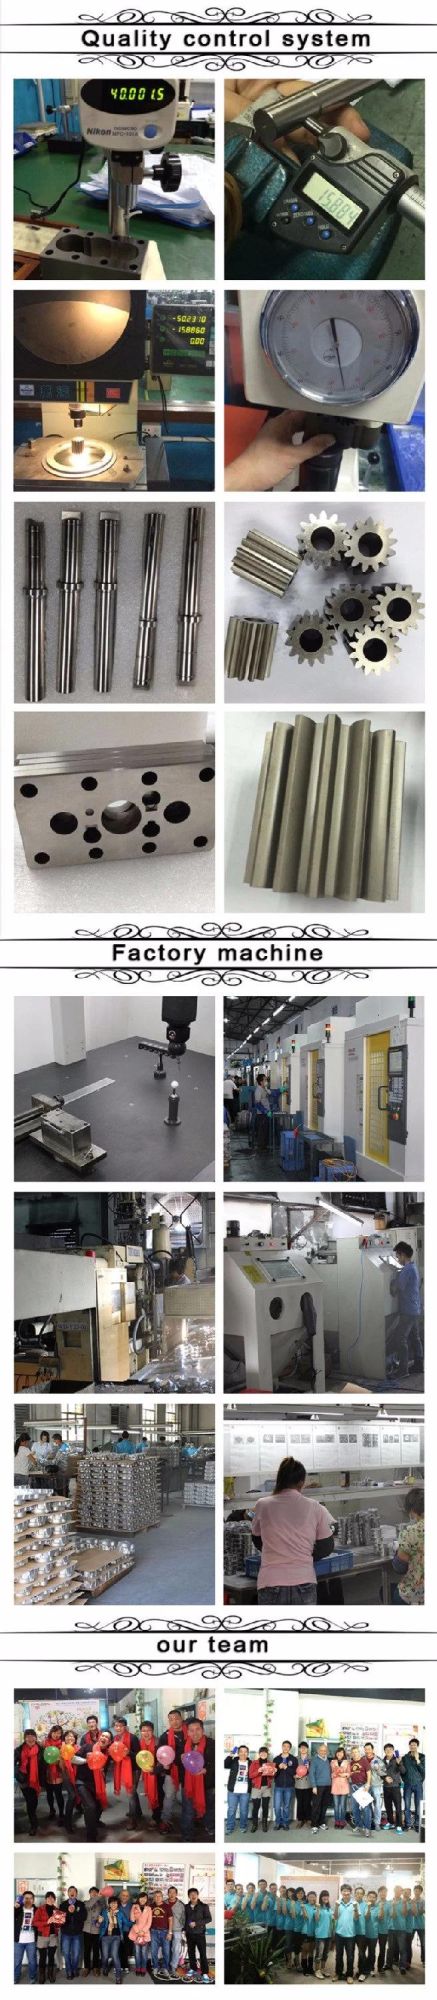 Injection Parts 3 Withh Surface Treatment